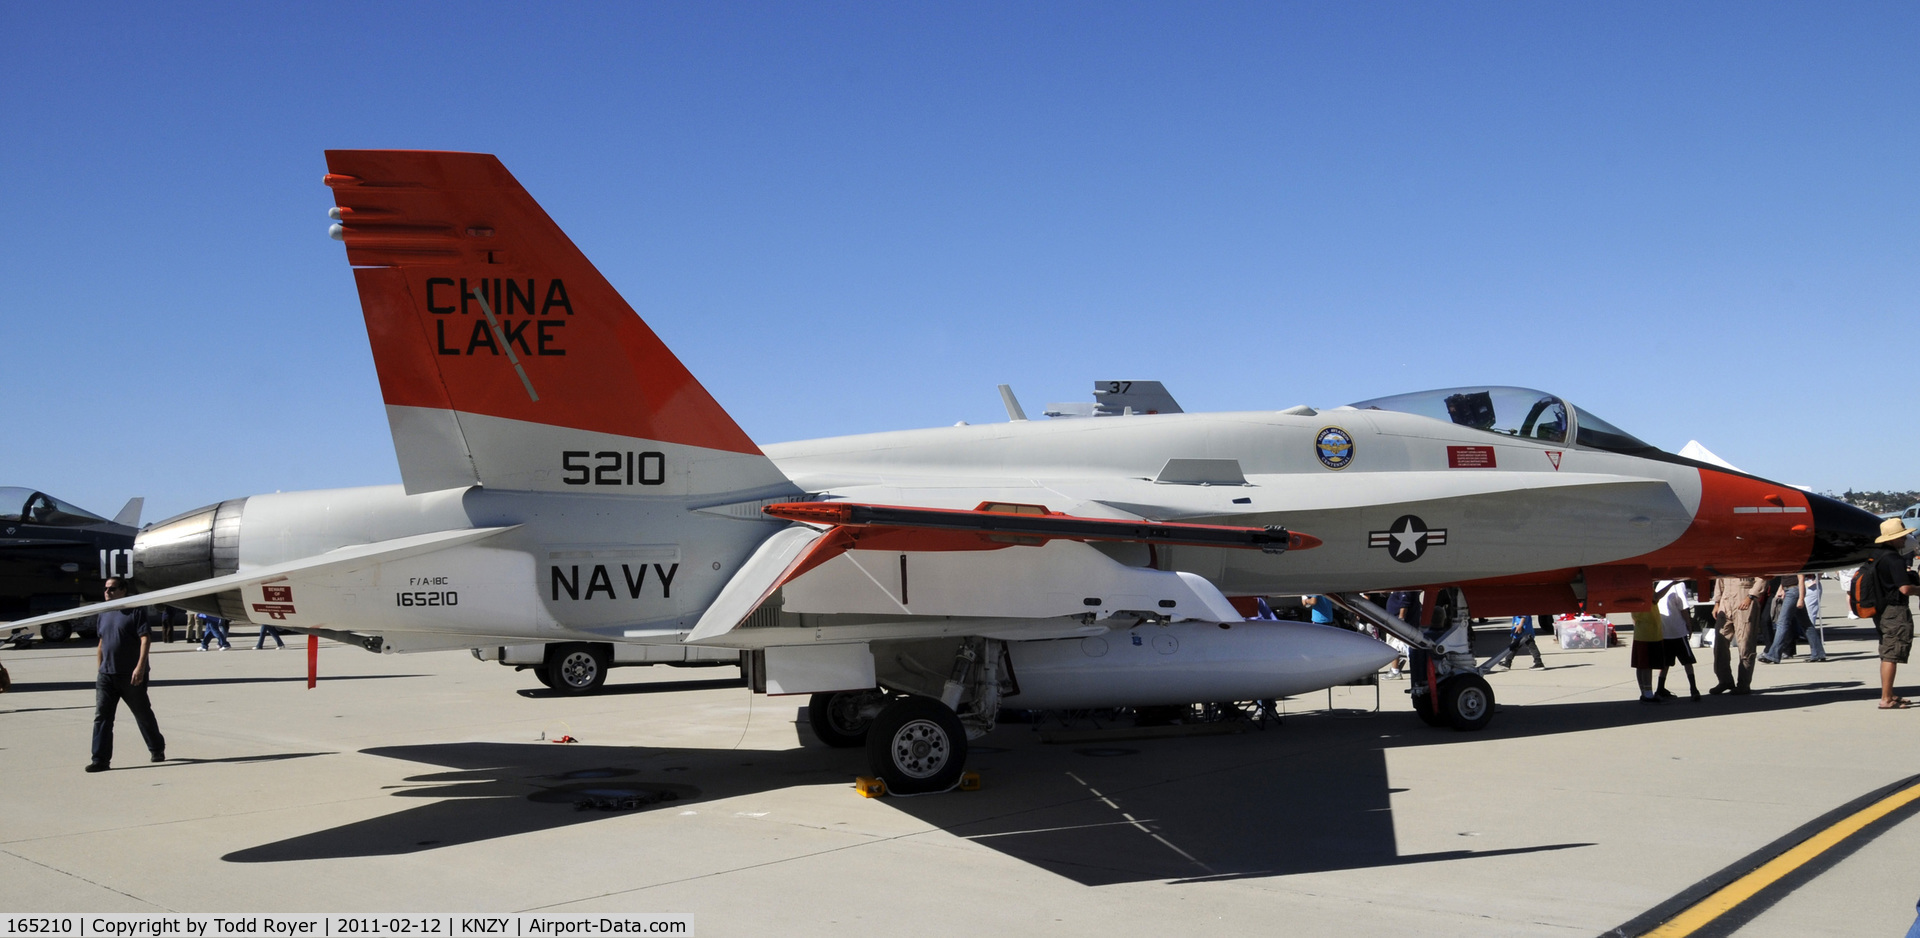 165210, McDonnell Douglas F/A-18C Hornet C/N 1382/C435, Special paint for the Centenial of Naval Aviation